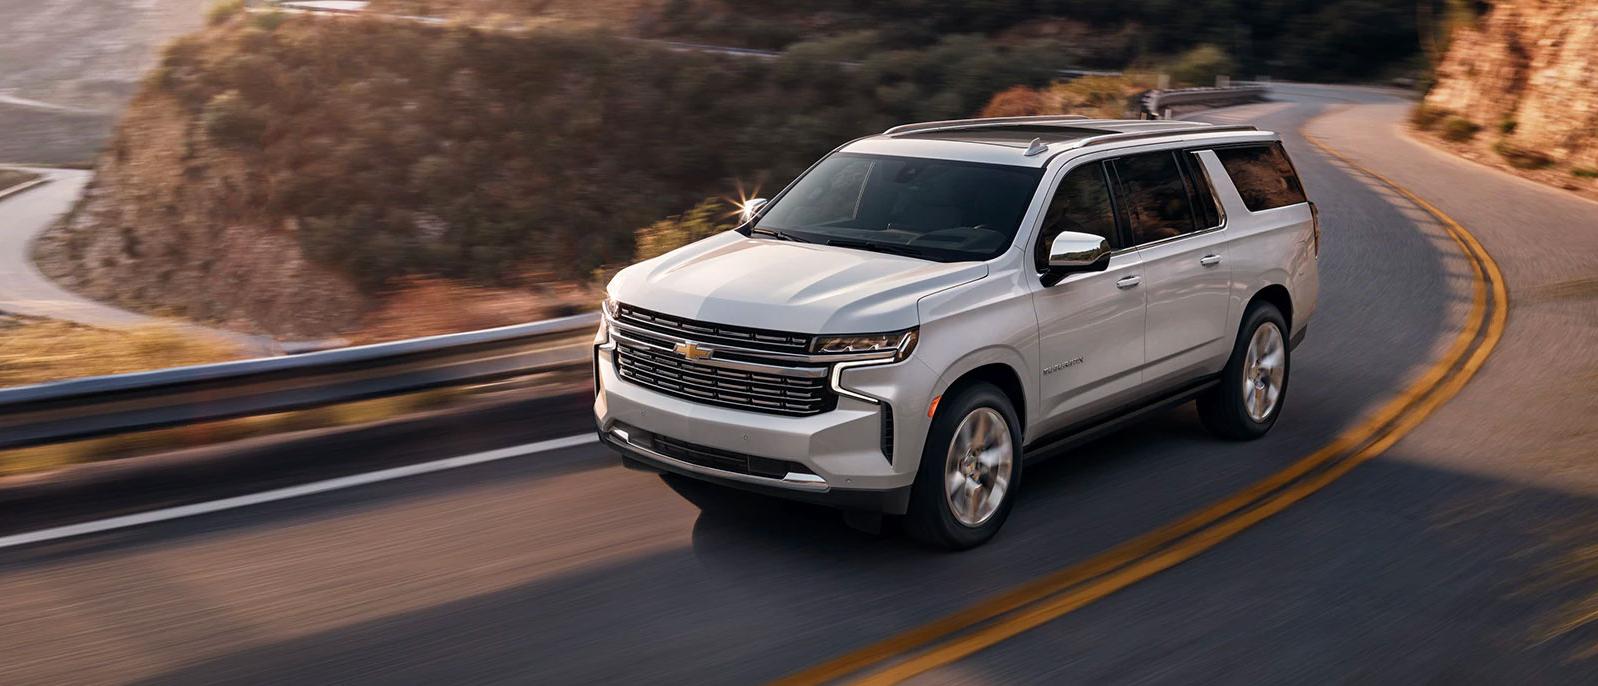 2021 Chevy Suburban For Sale | Chevy Dealership DALLAS | Friendly Chevrolet